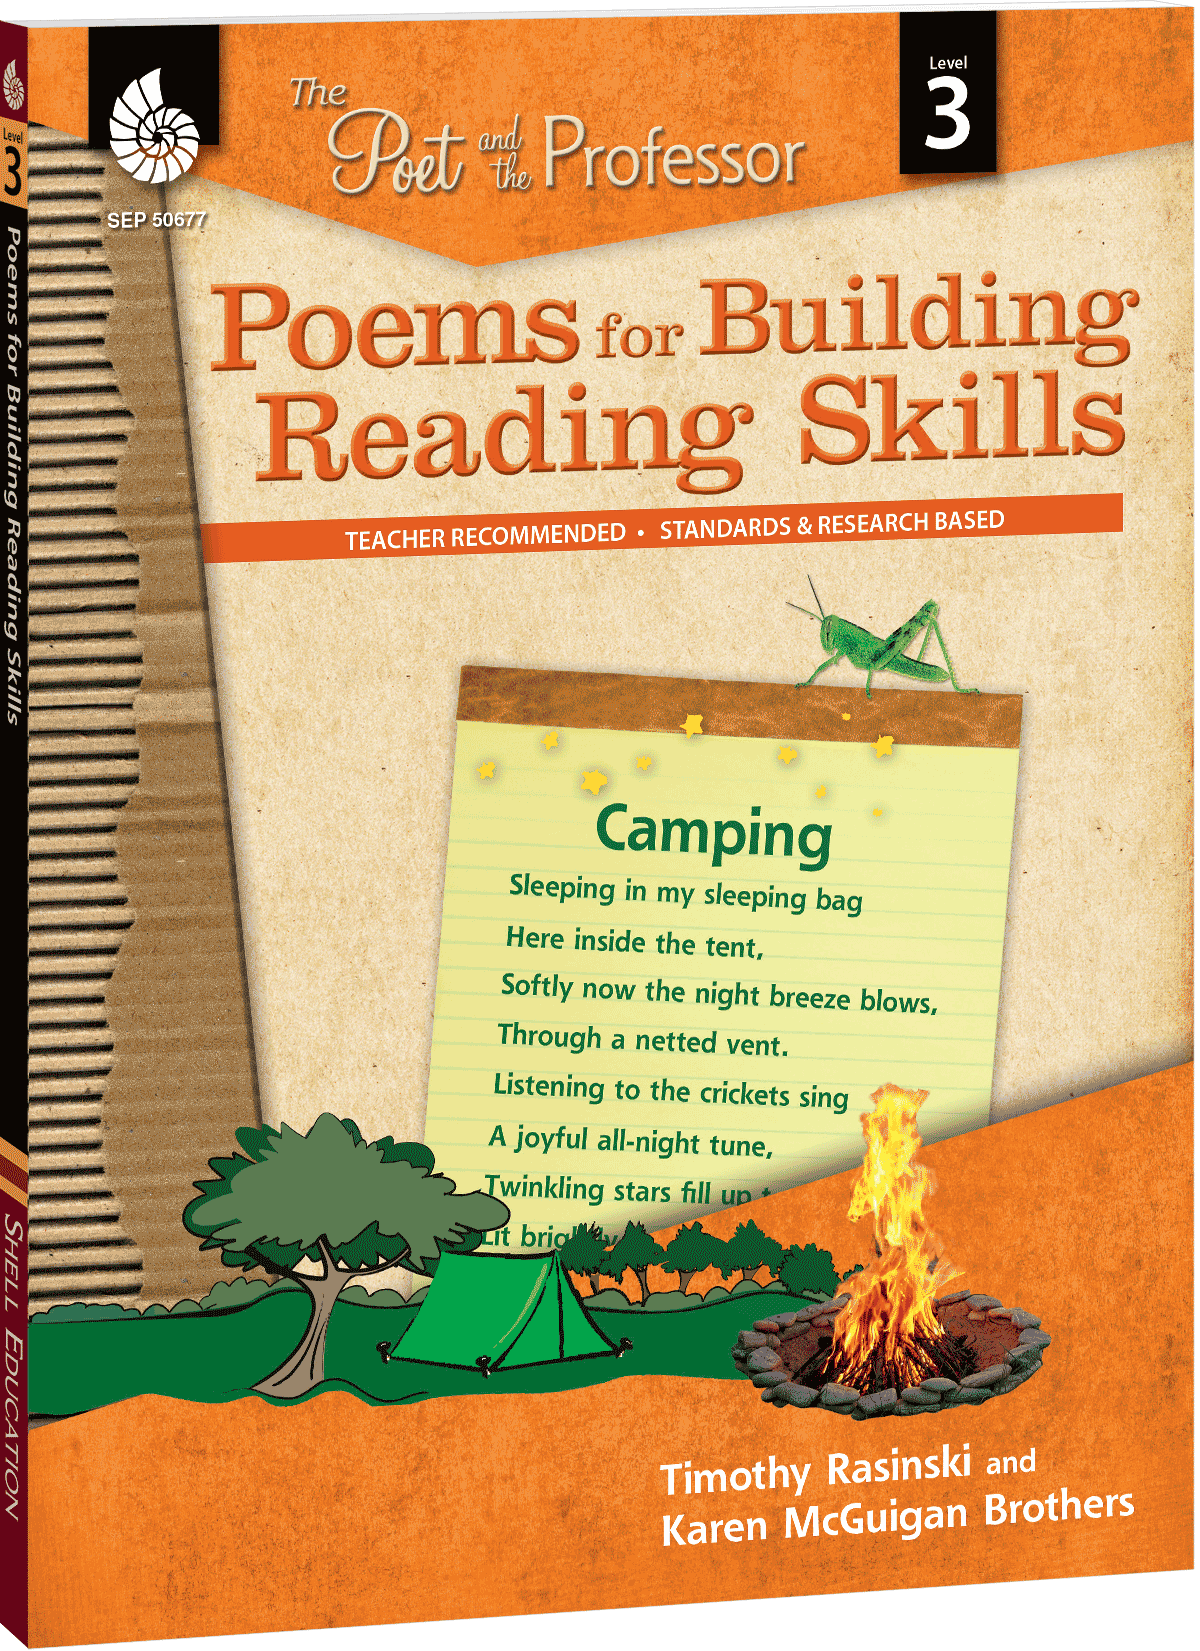 Skills　Created　Level　Teacher　Reading　Building　for　Poems　Materials